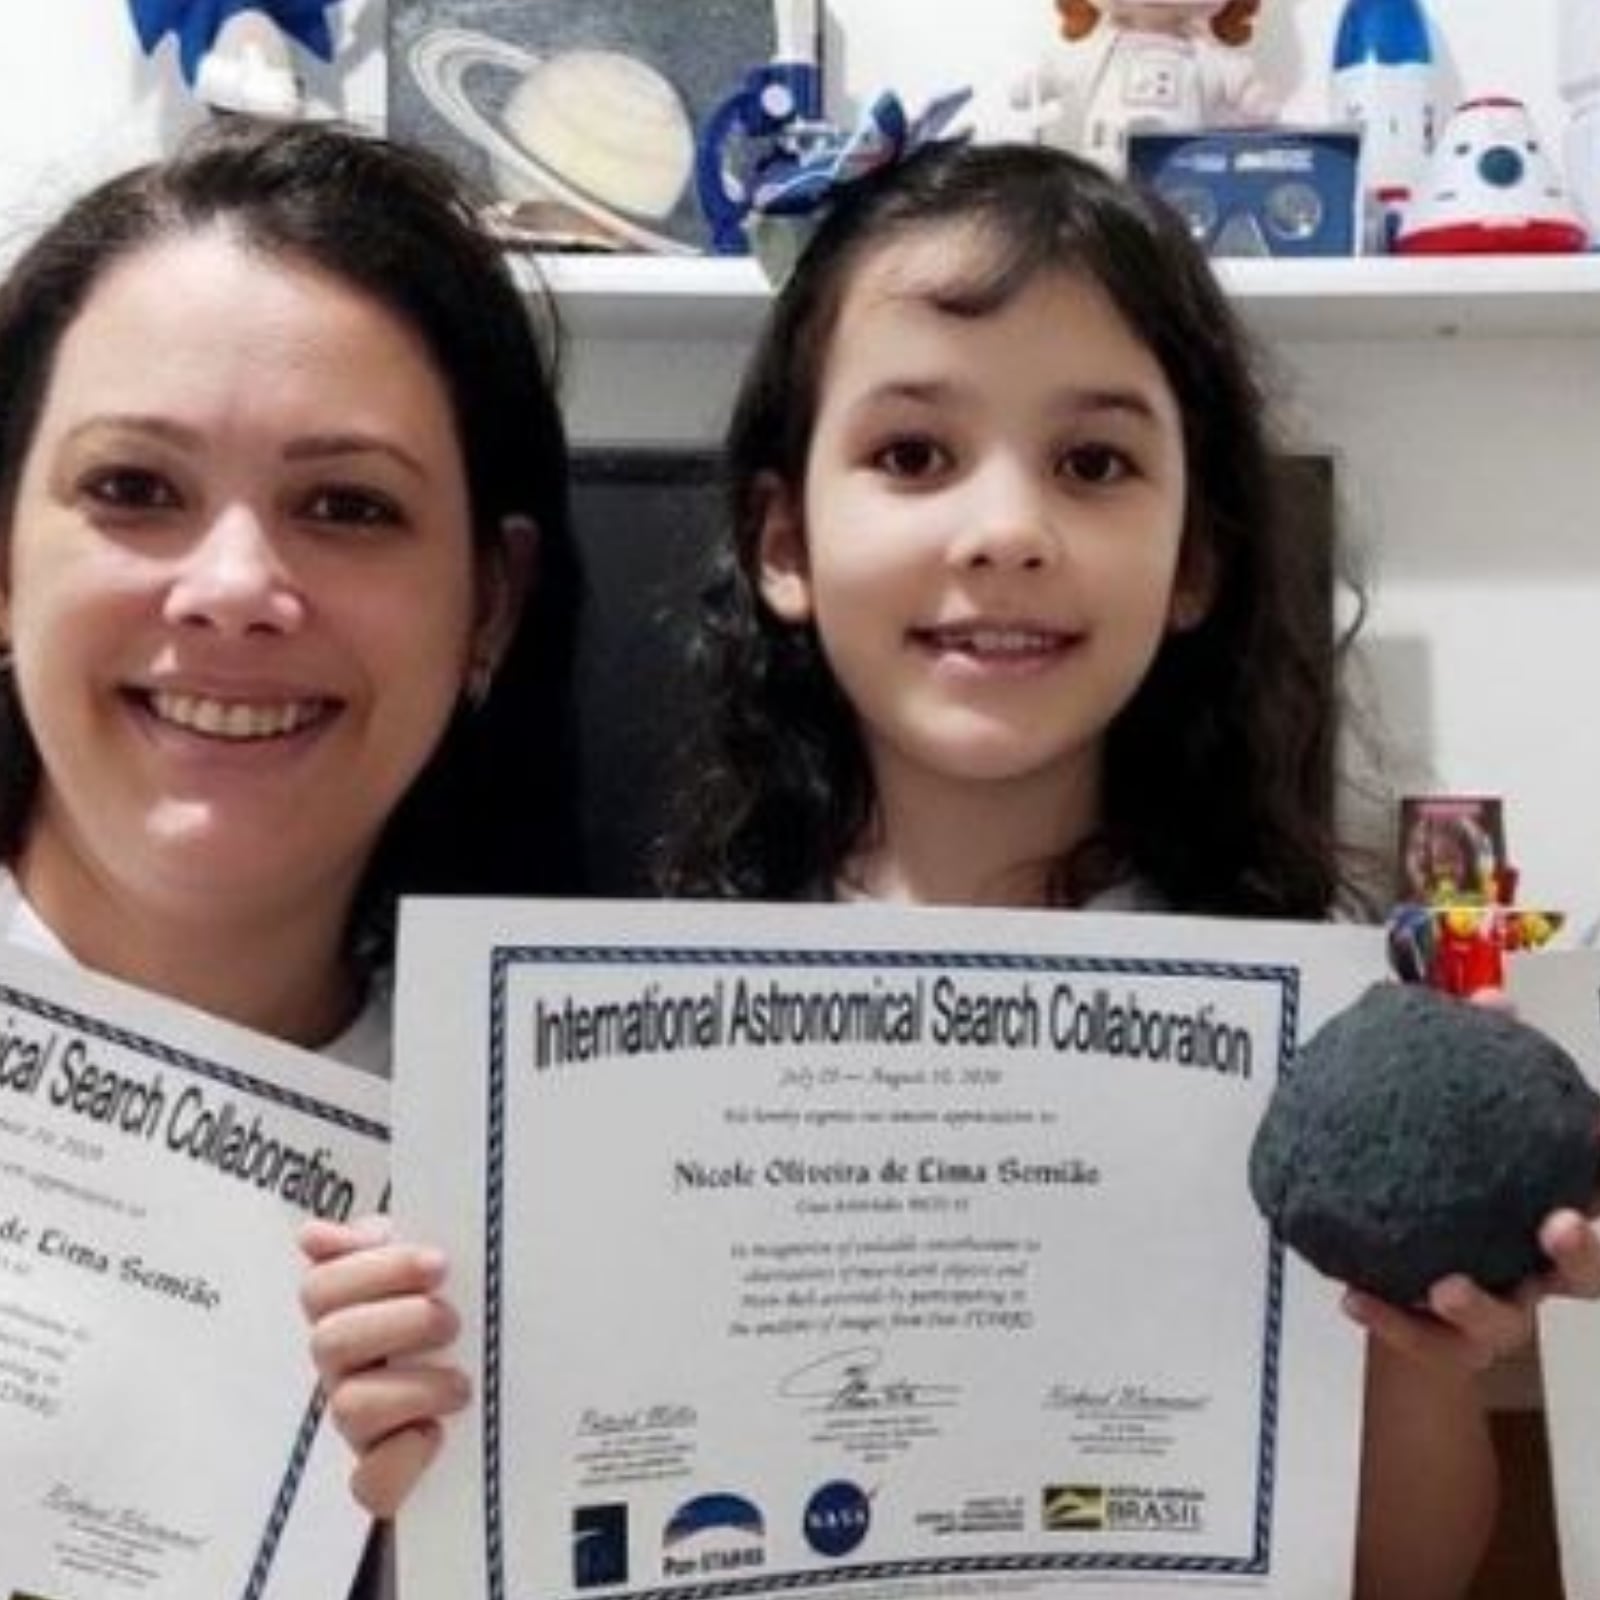 This Eight-year-old From Brazil Has Helped NASA Find Seven Asteroids